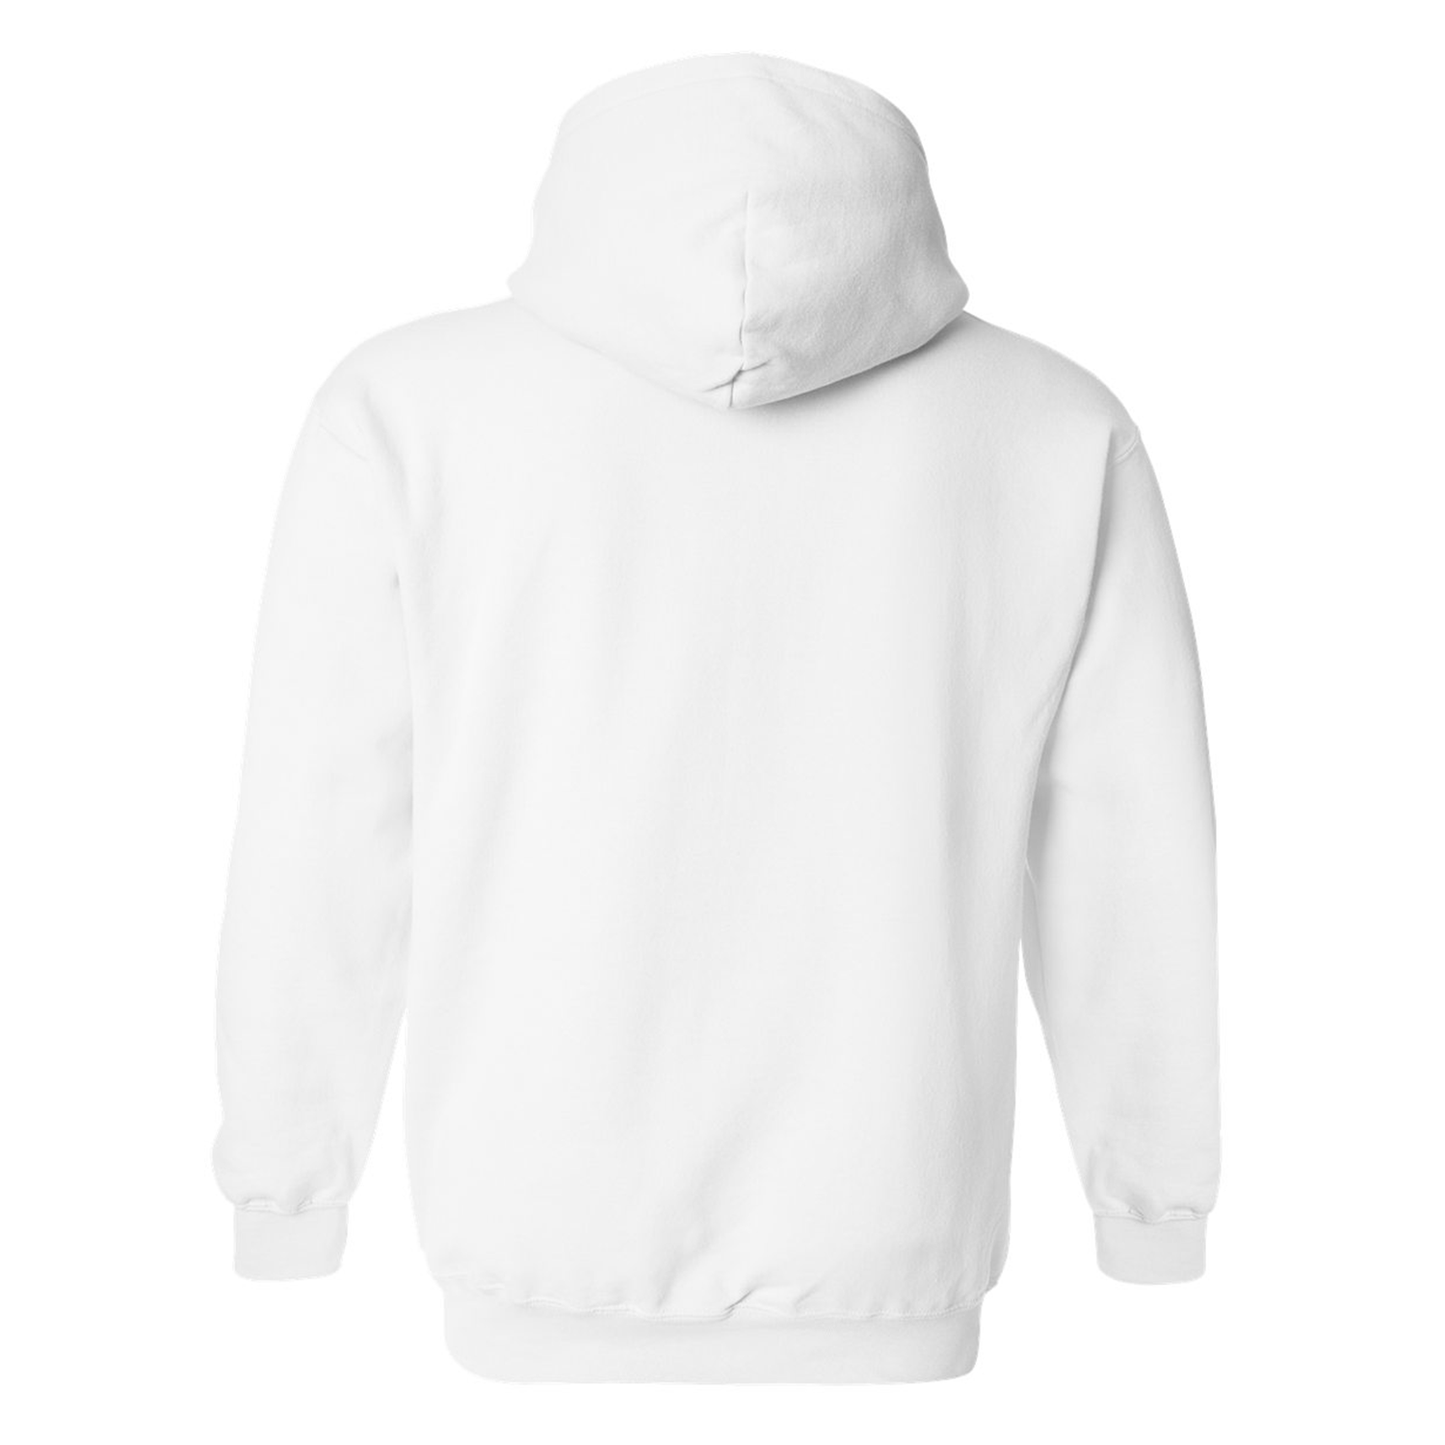 South Park Cartman Born with a Plastic Spoon Hooded Sweatshirt - Paramount Shop